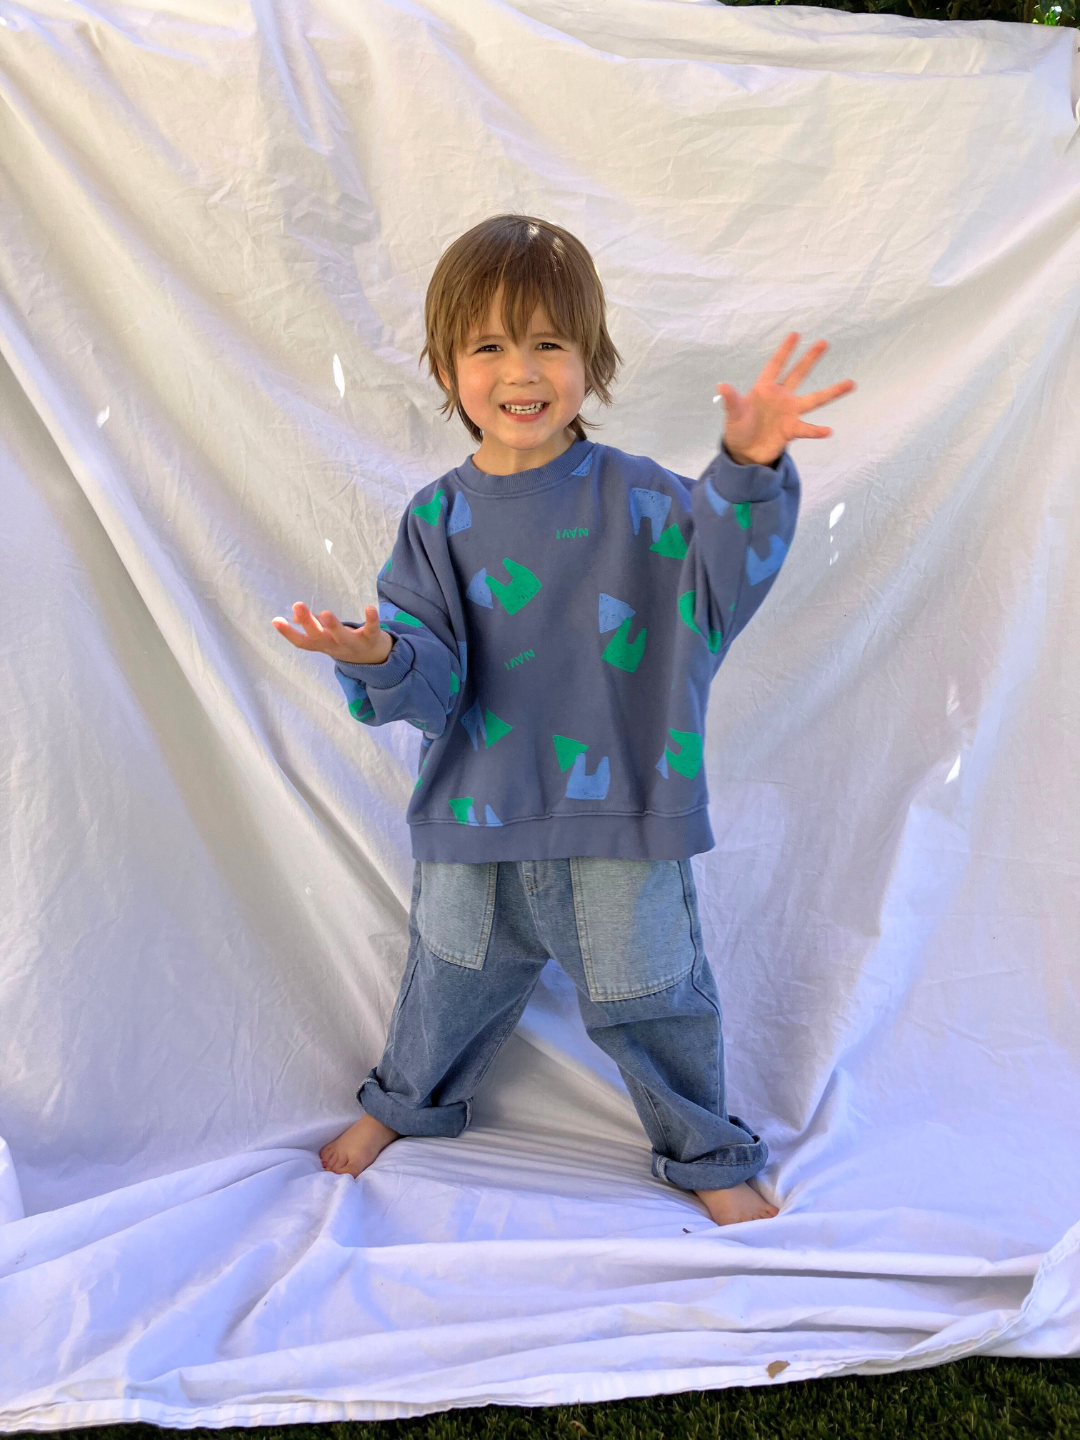 Child wearing the kids Duo Sweatshirt in faded blue printed with green and blue shapes and the word Navi. He is smiling and waving both hands, and wearing baggy blue jeans, and standing on a white sheet backdrop over grass.